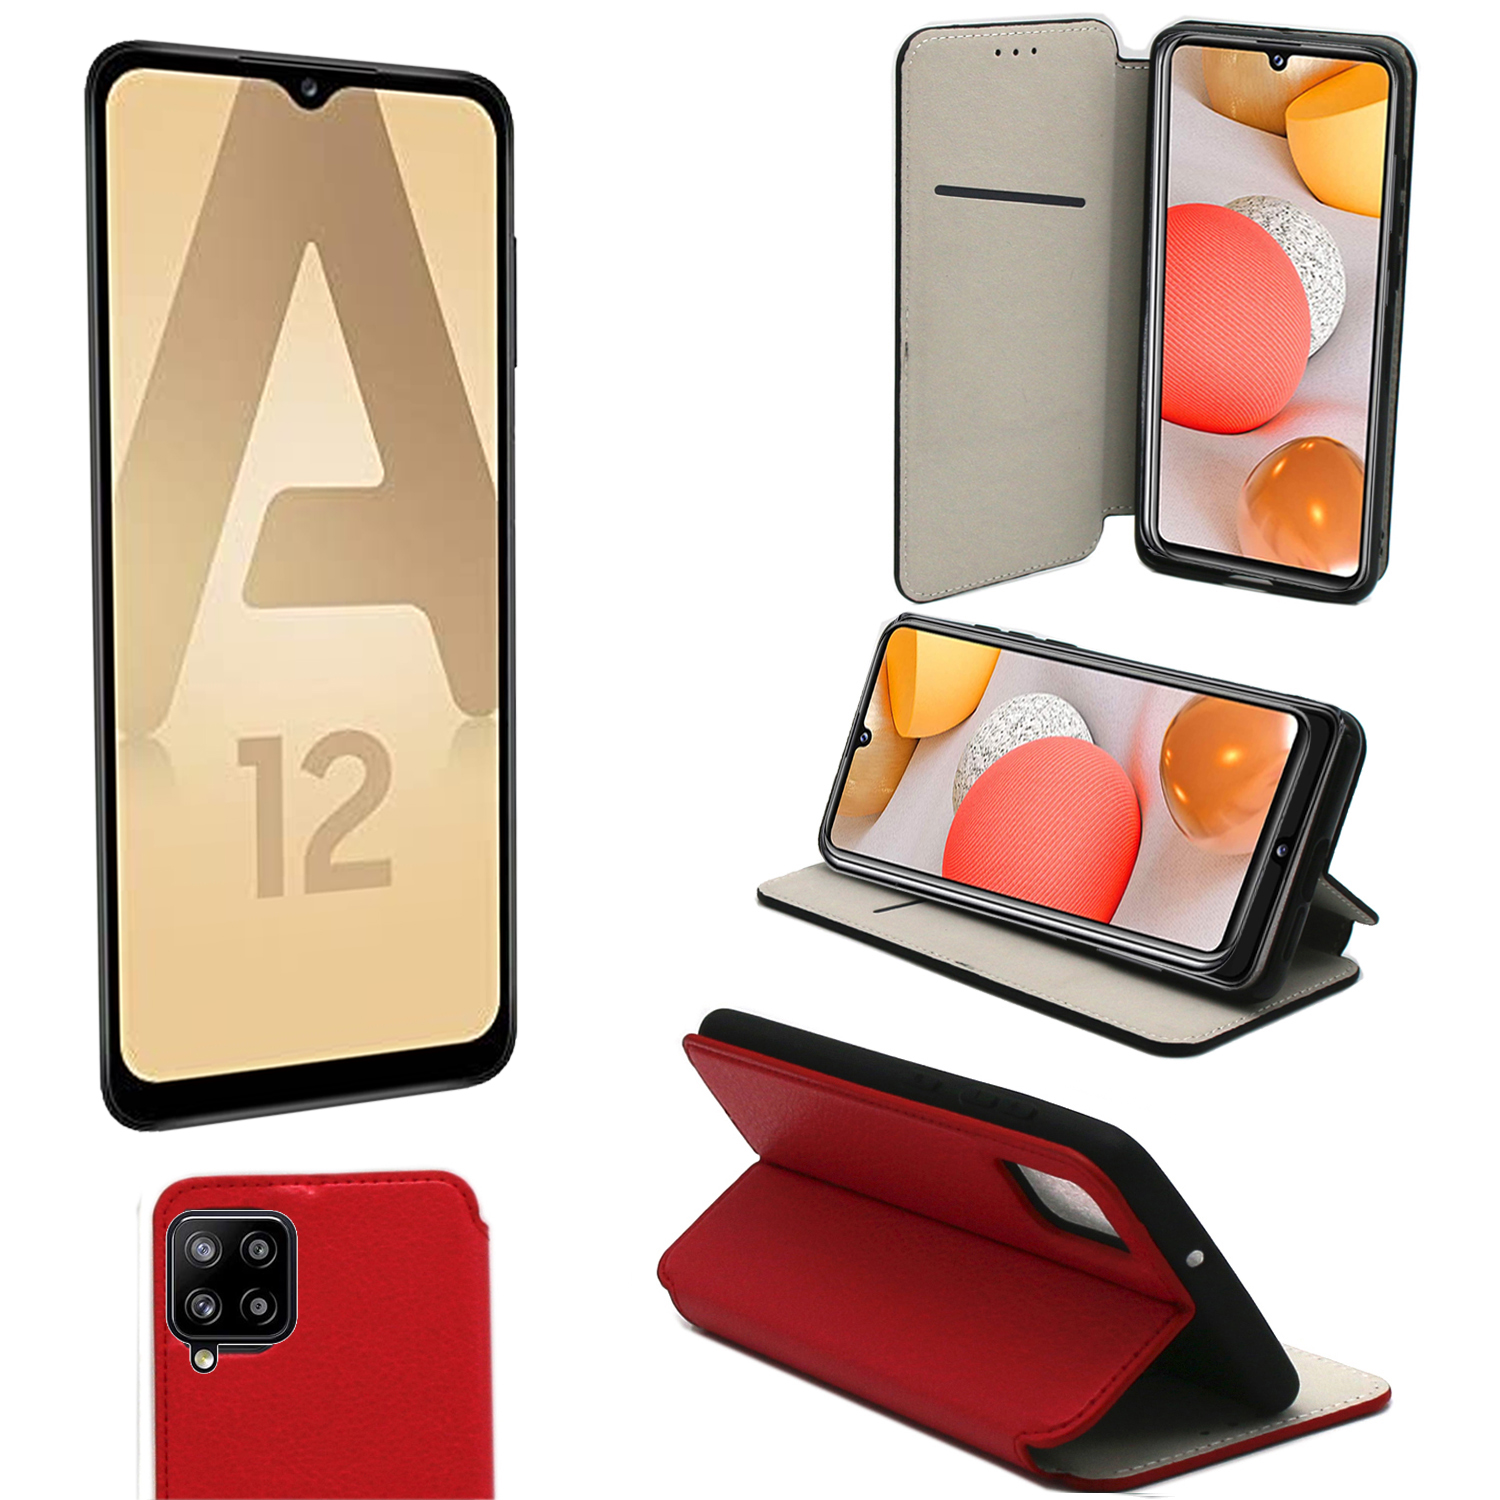 Samsung Galaxy A12 Etui / Housse pochette protection rouge